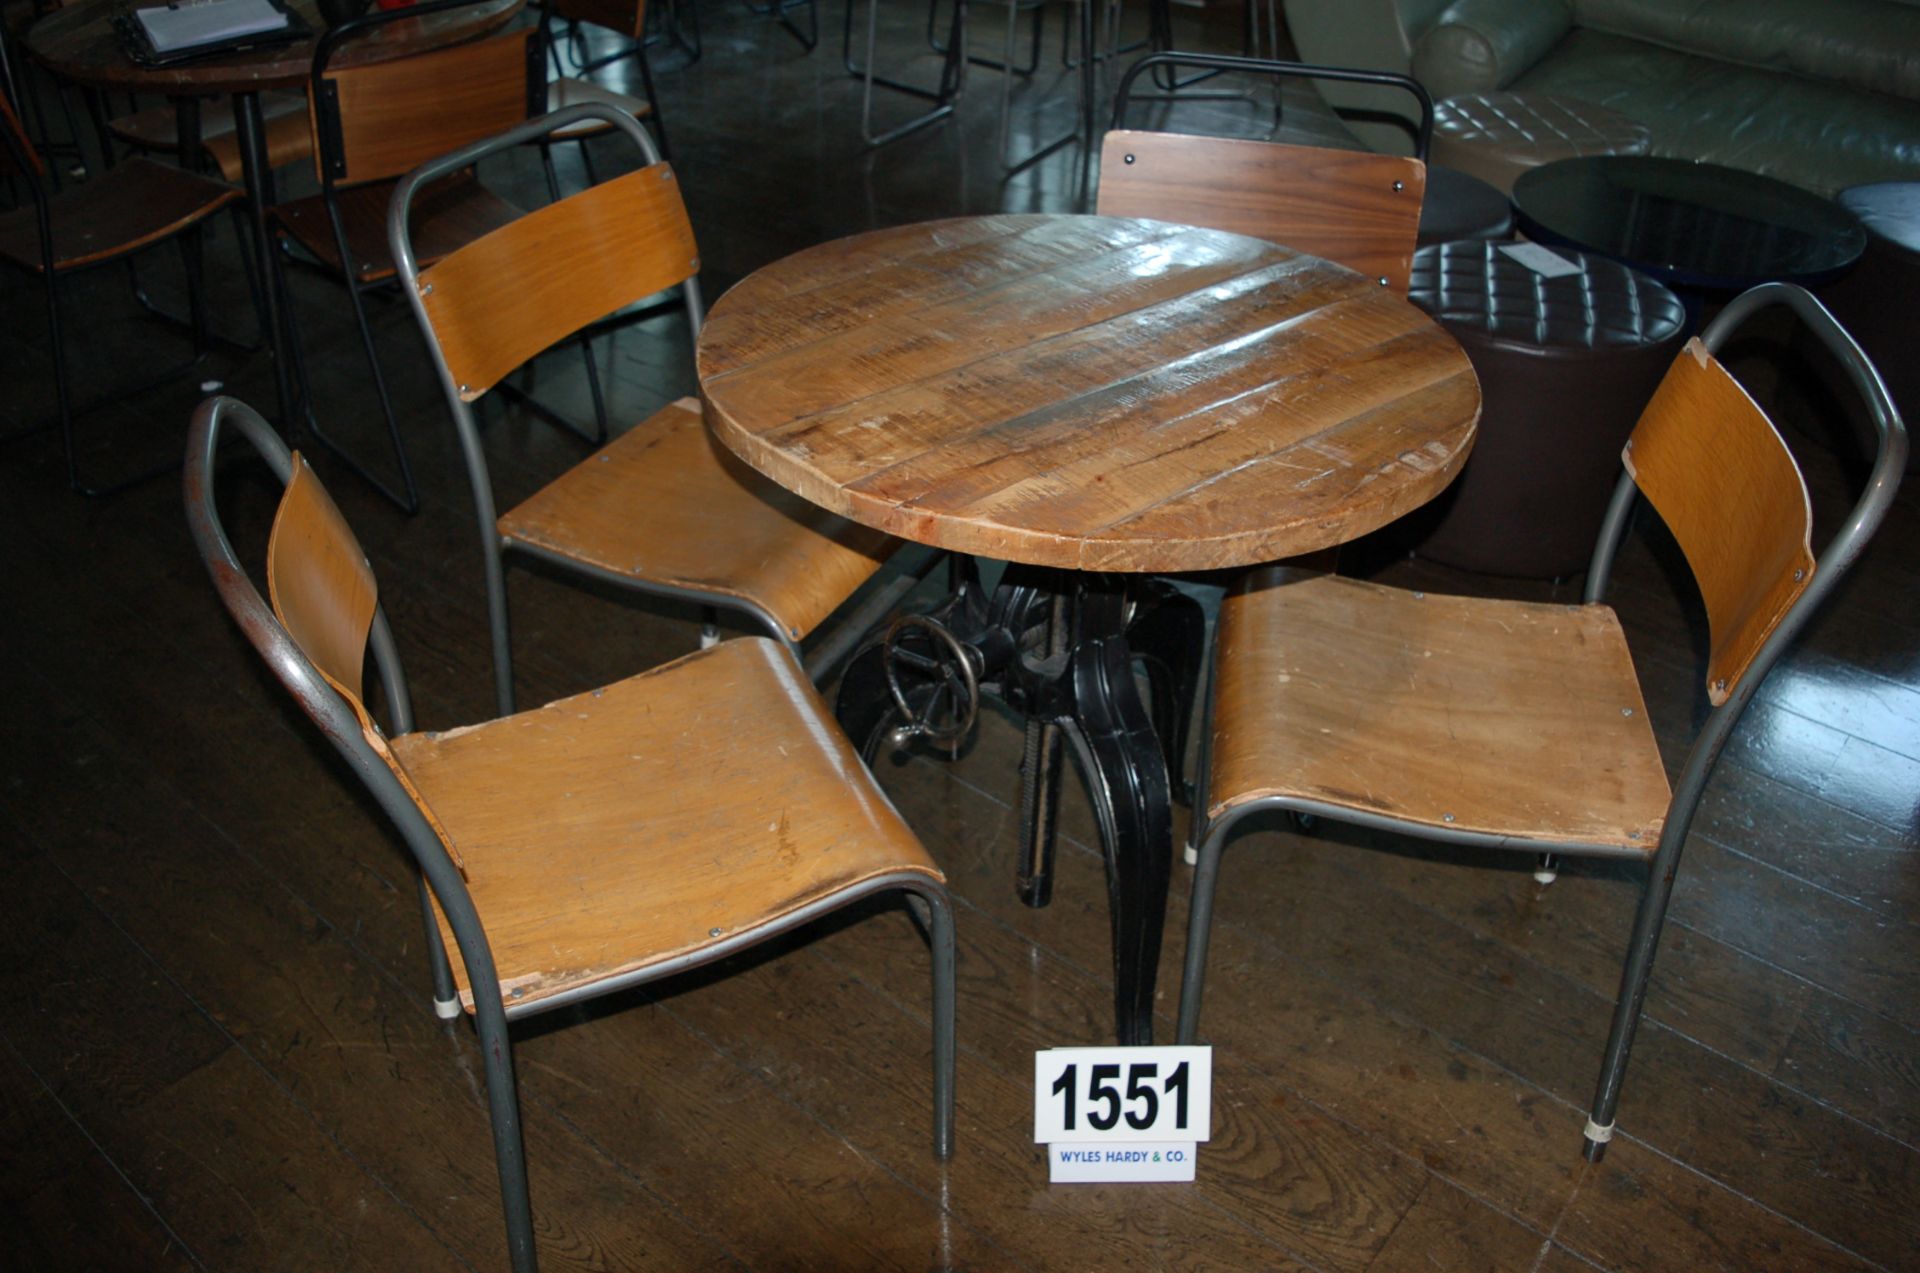 A Vintage Industrial Style Heavy Plank Topped Circular Table 690mm Diameter on a Rack and Pinion